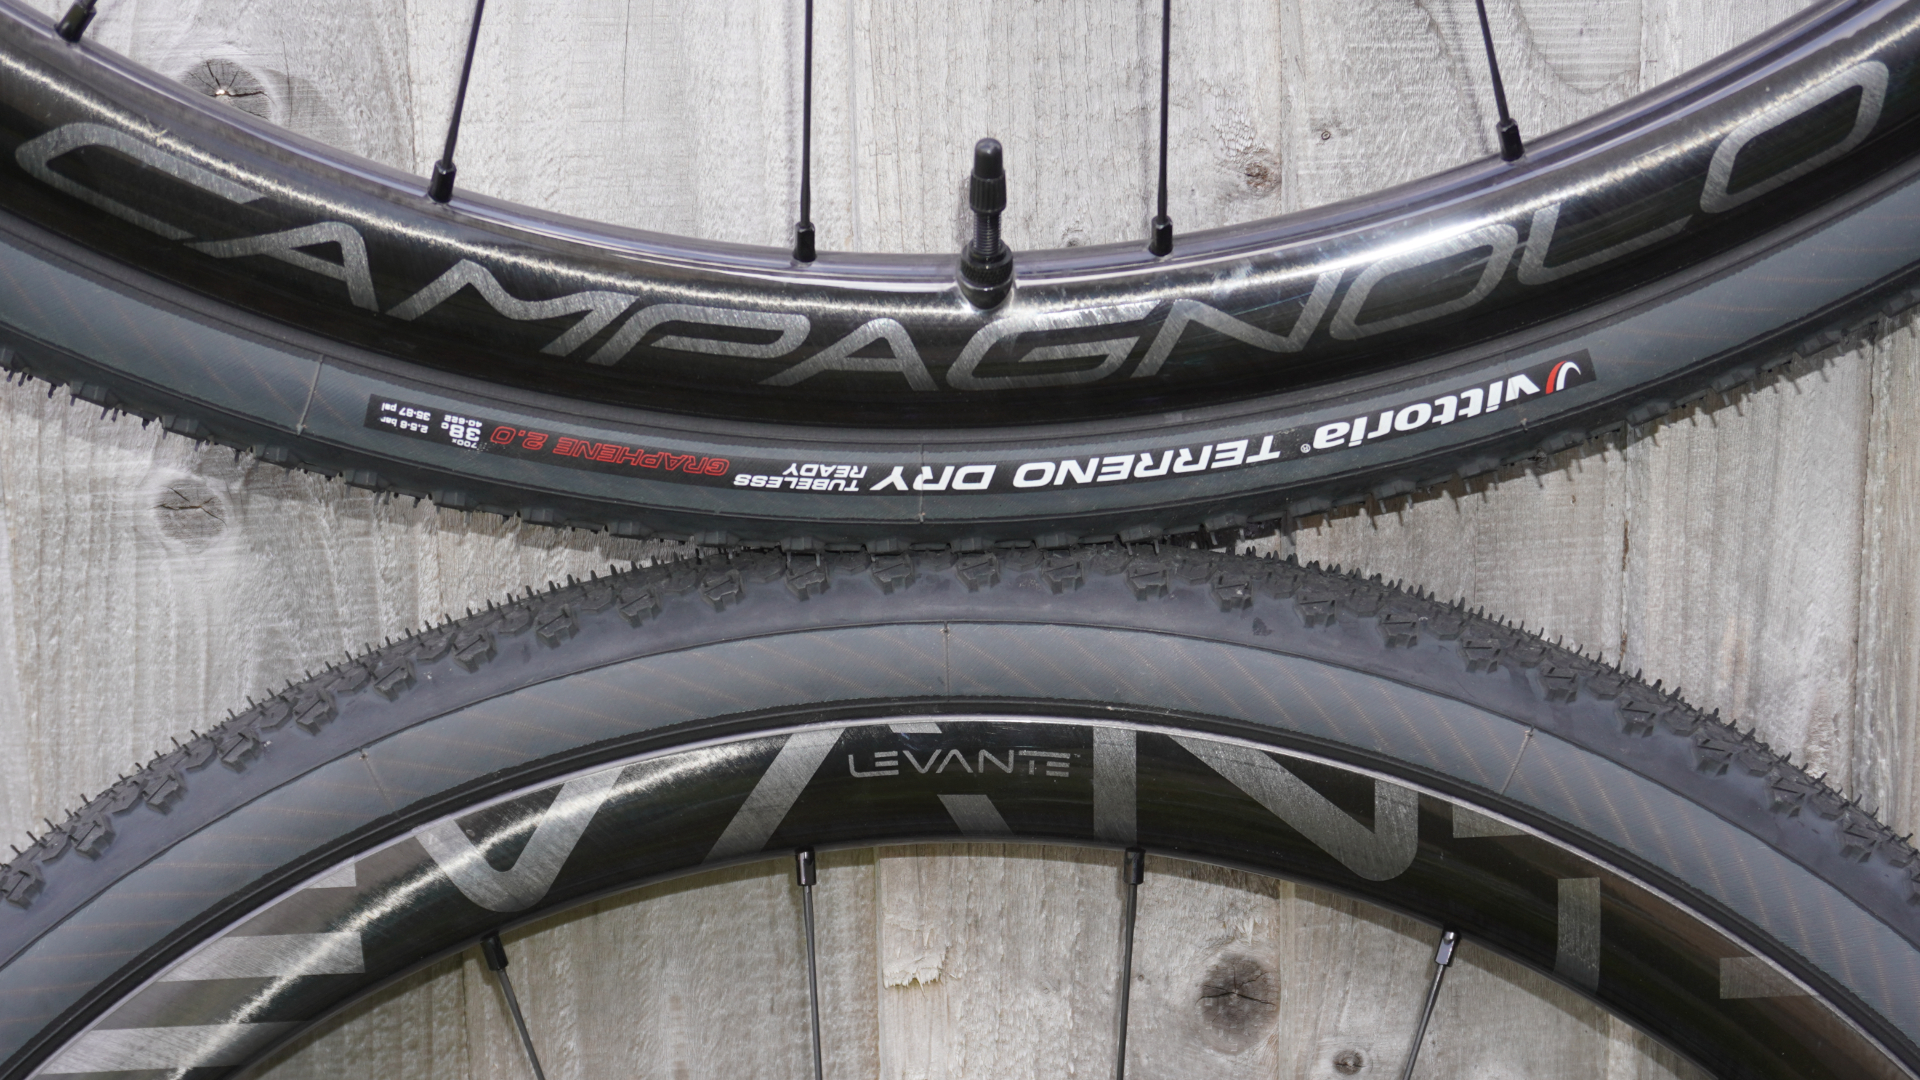 New Campagnolo Levante wheelset targets gravel racing and